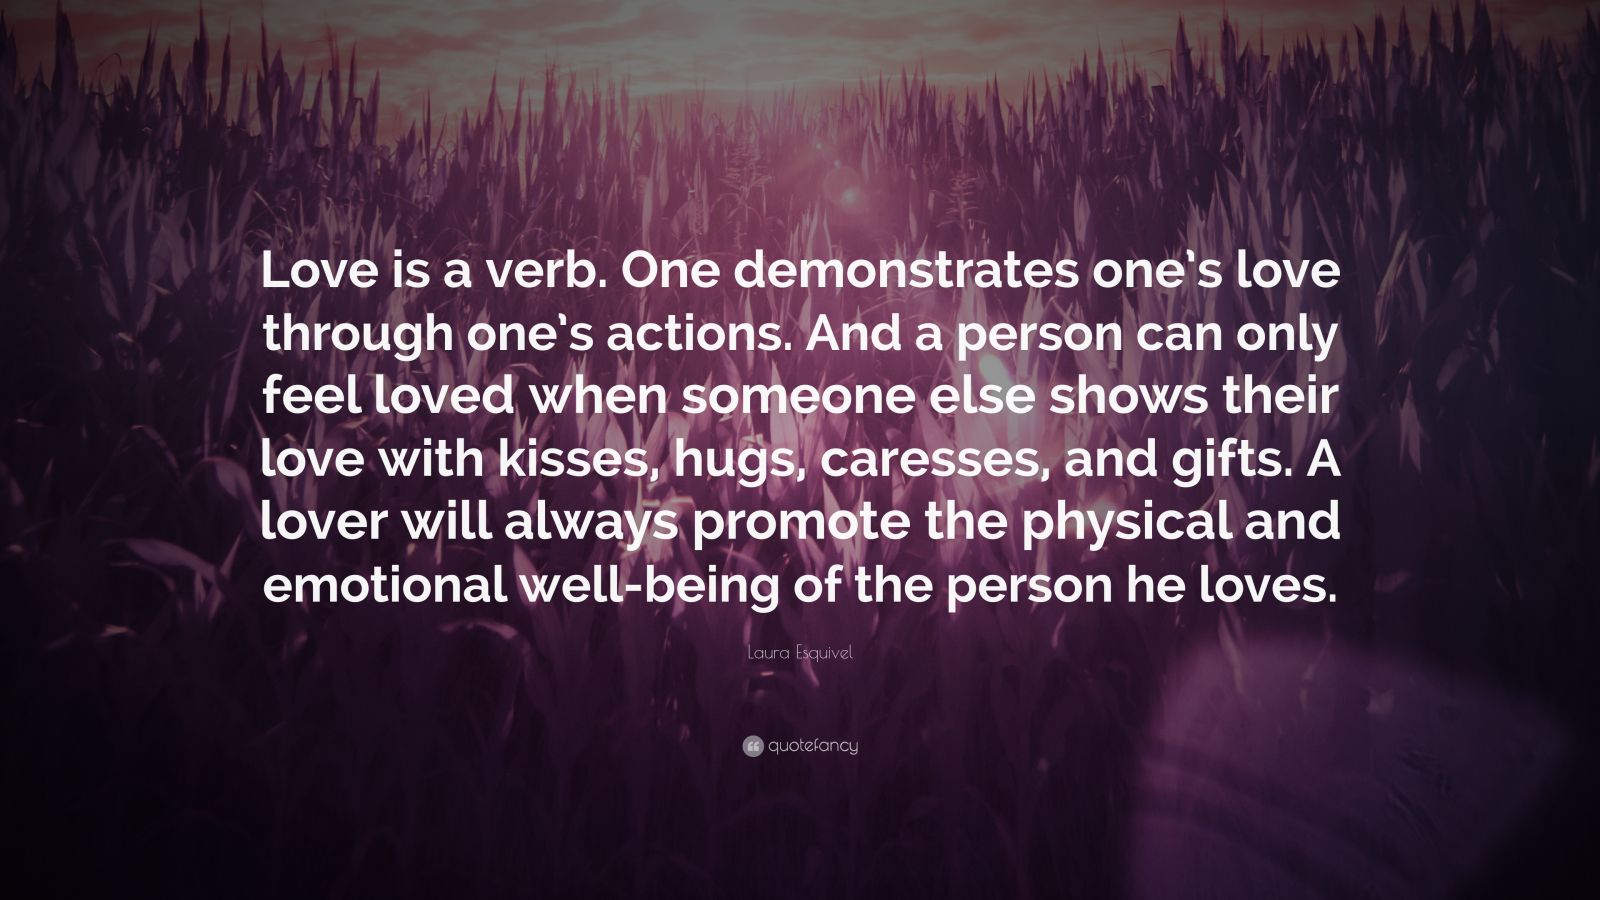 Laura Esquivel Quote: “Love is a verb. One demonstrates one’s love ...